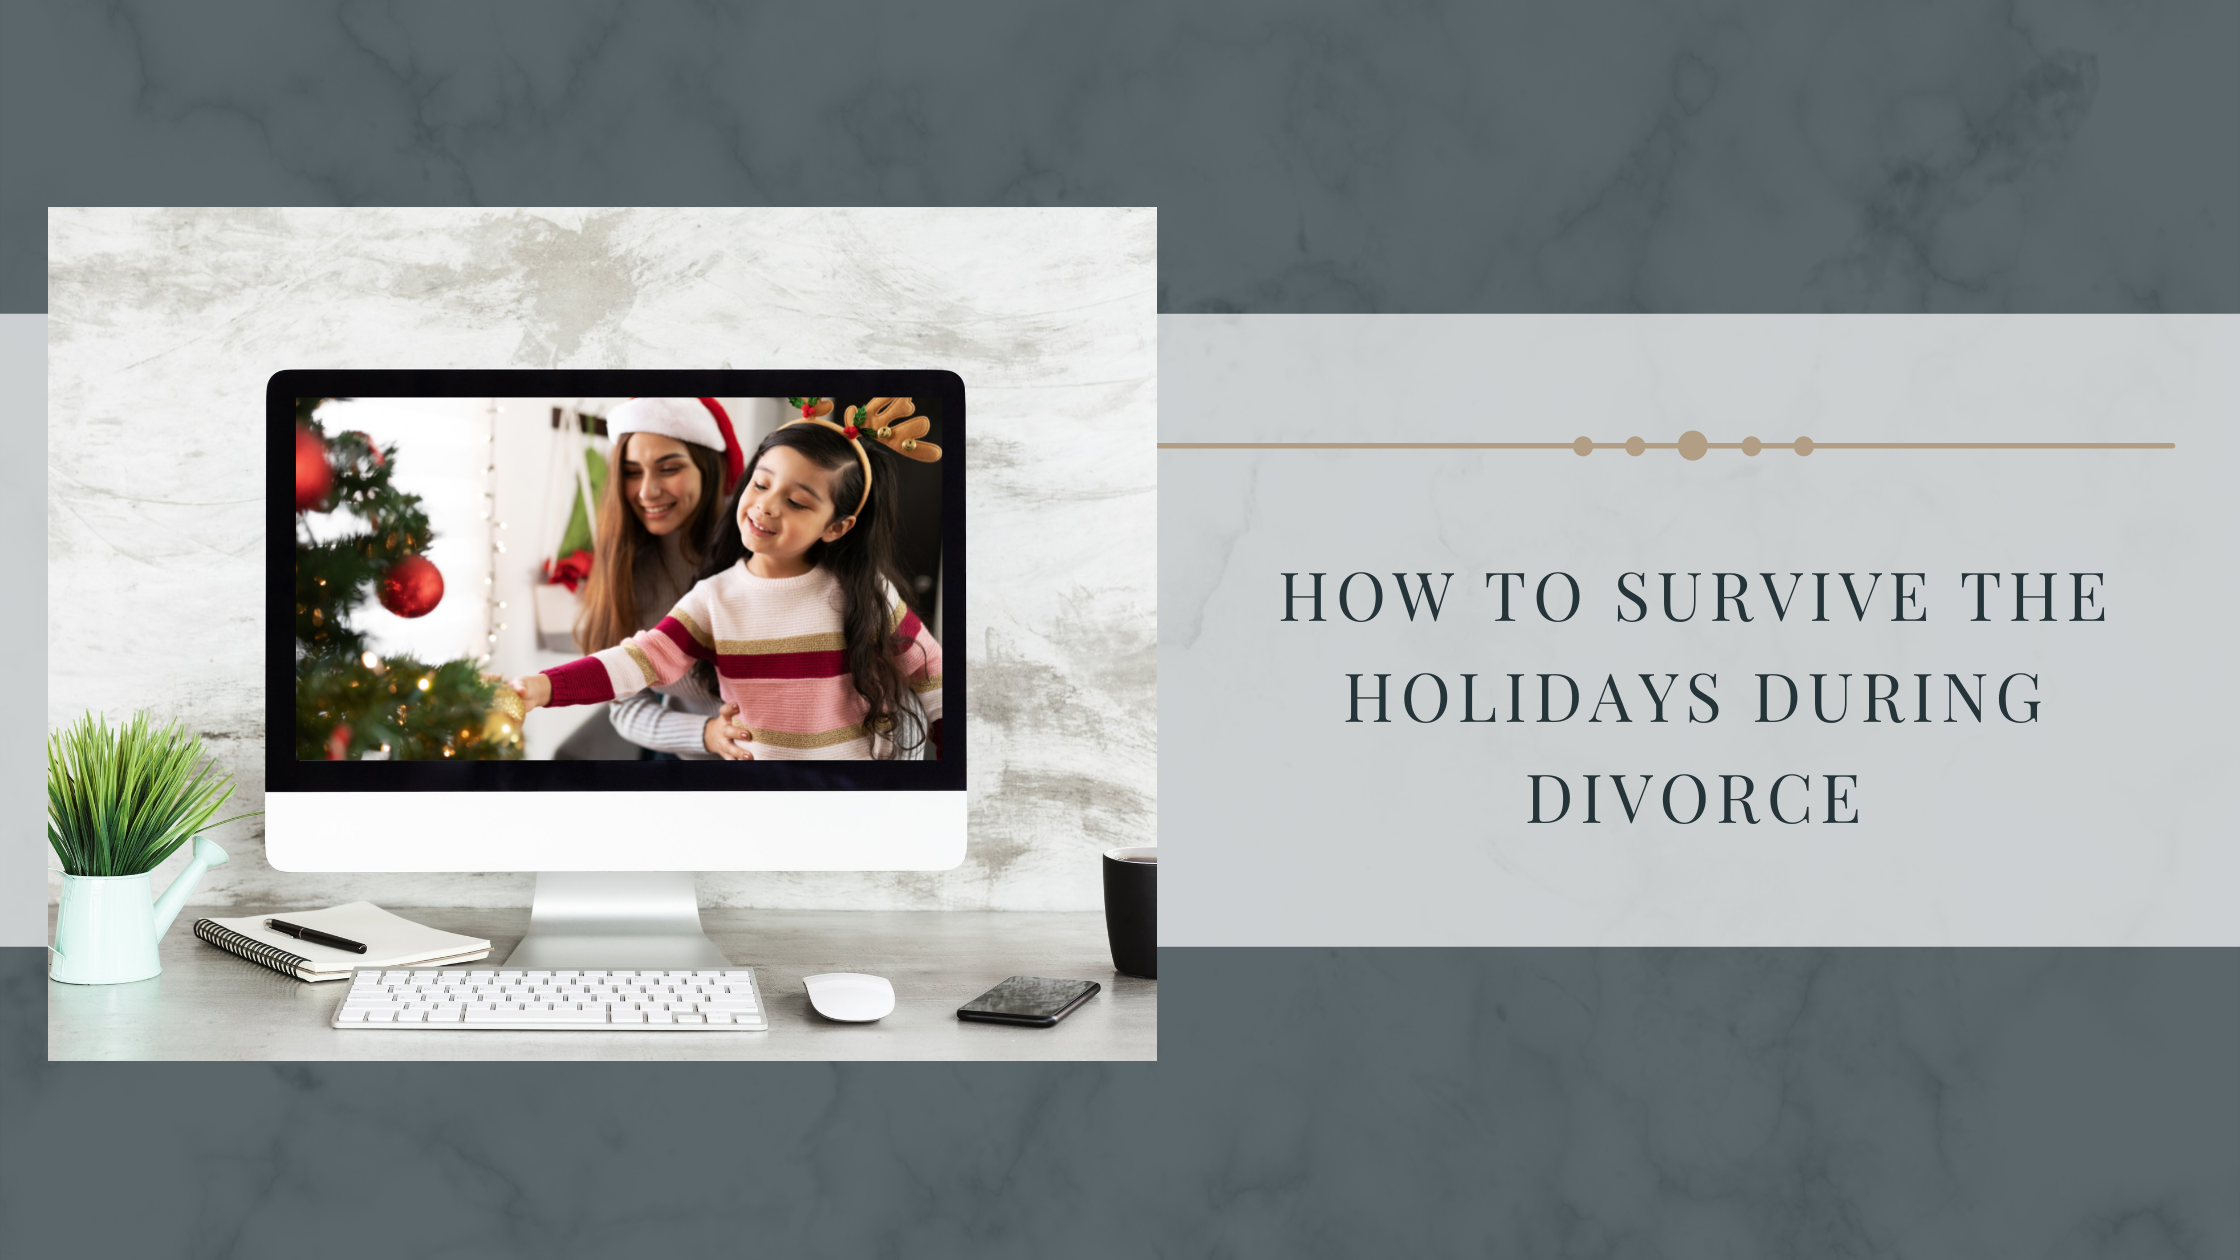 How to Survive the Holidays During Divorce